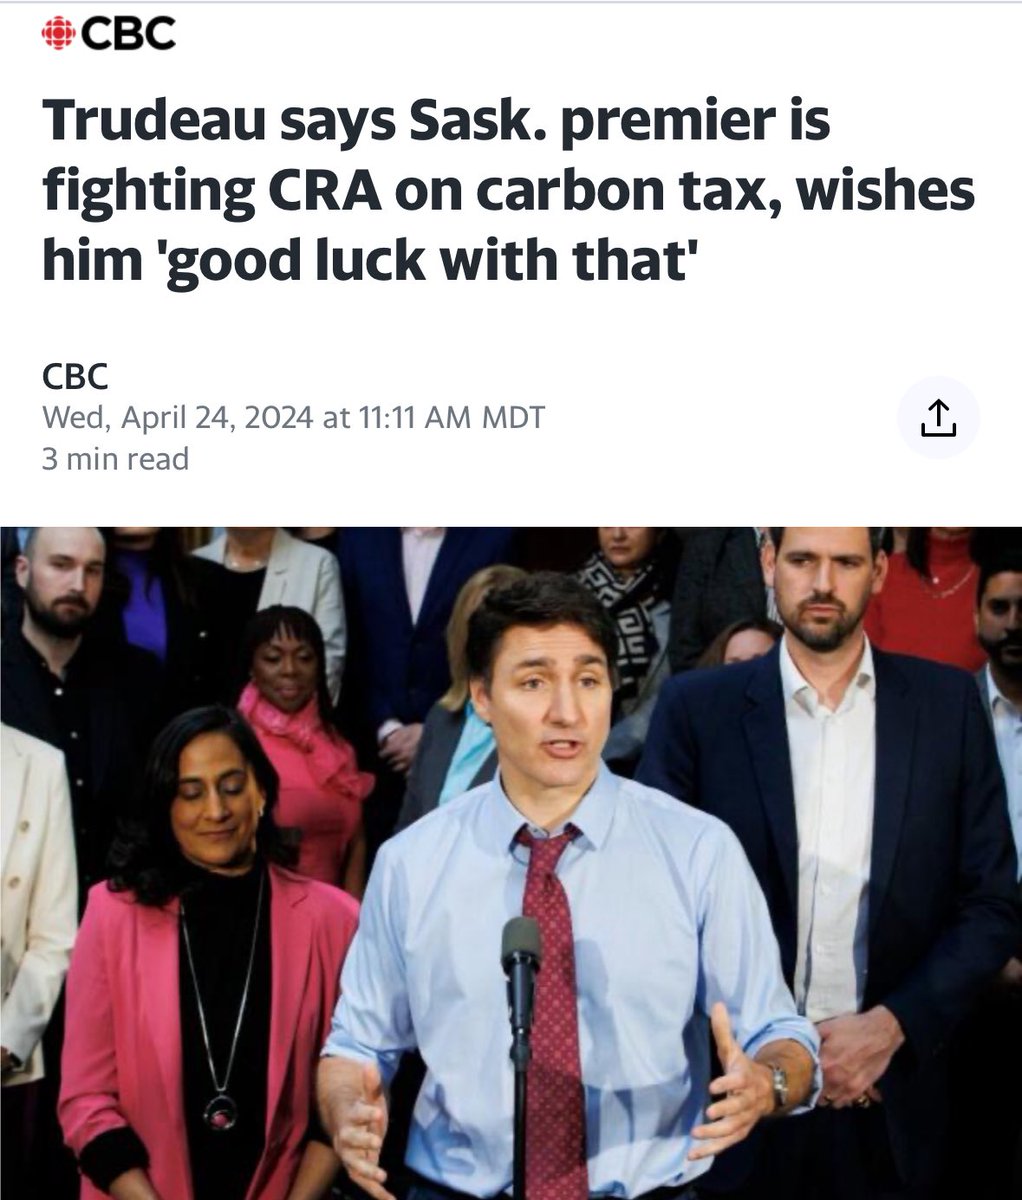 🇨🇦Trudeau:

✅ Weaponized  CBC and Media 
✅ Weaponized Provincial Funding 
✅ Weaponized Education System 
✅ Weaponized Censorship 
✅ Weaponized Military 
✅ Weaponized CRA

What I miss?🤔